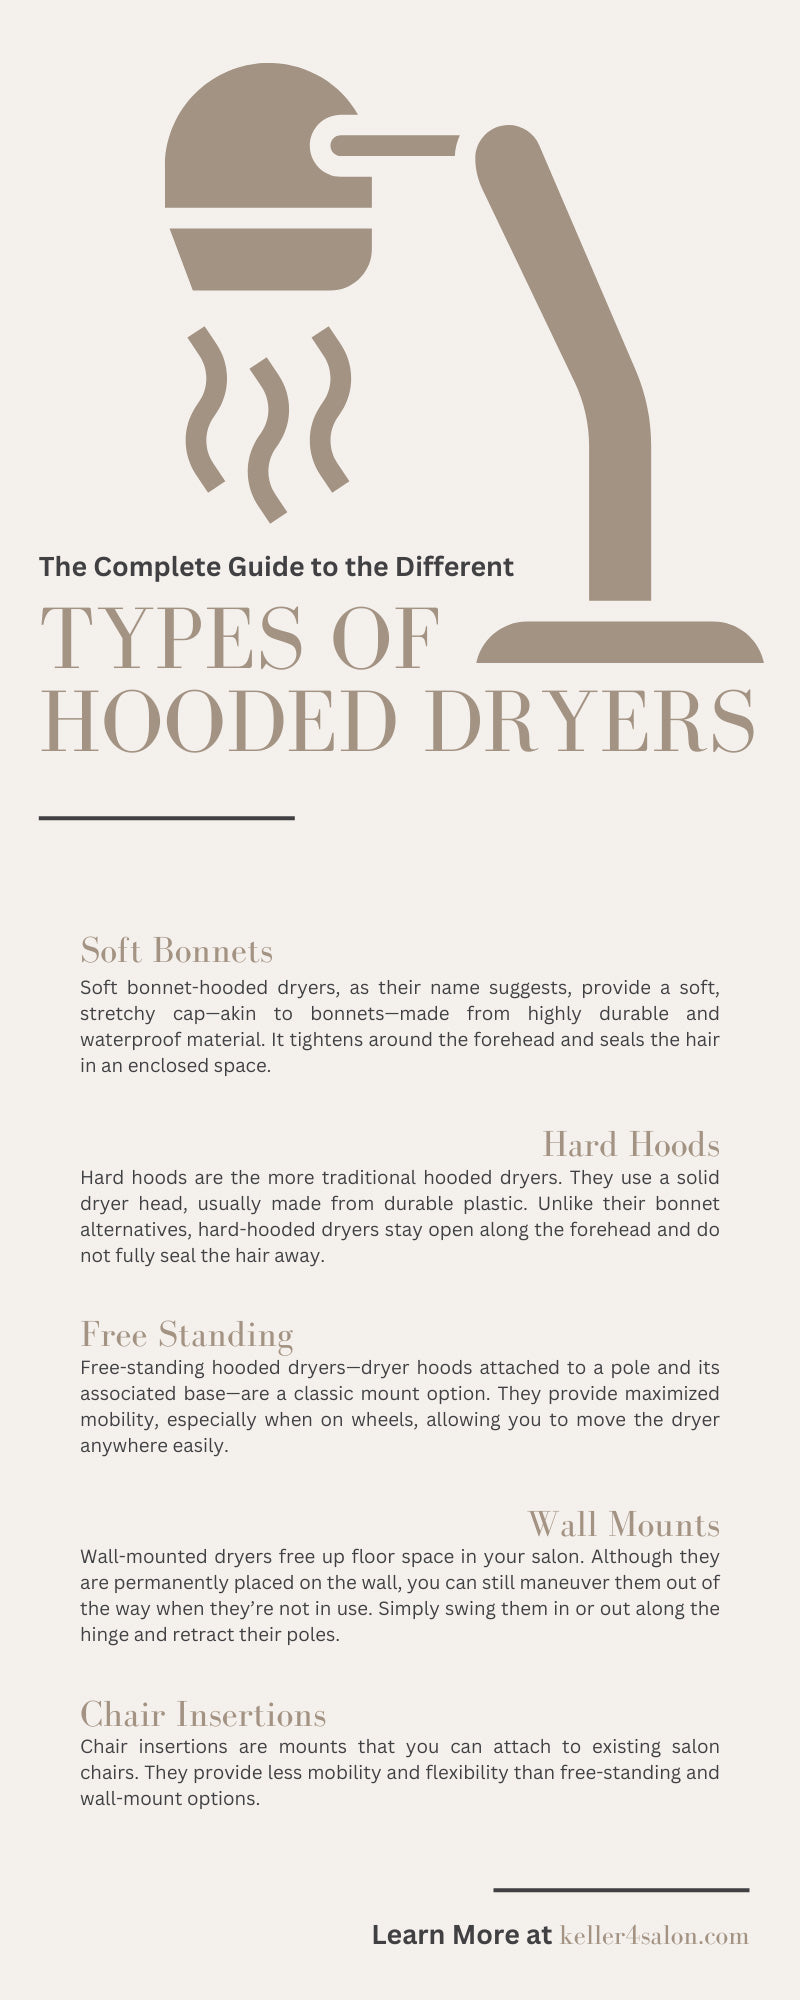 The Complete Guide to the Different Types of Hooded Dryers